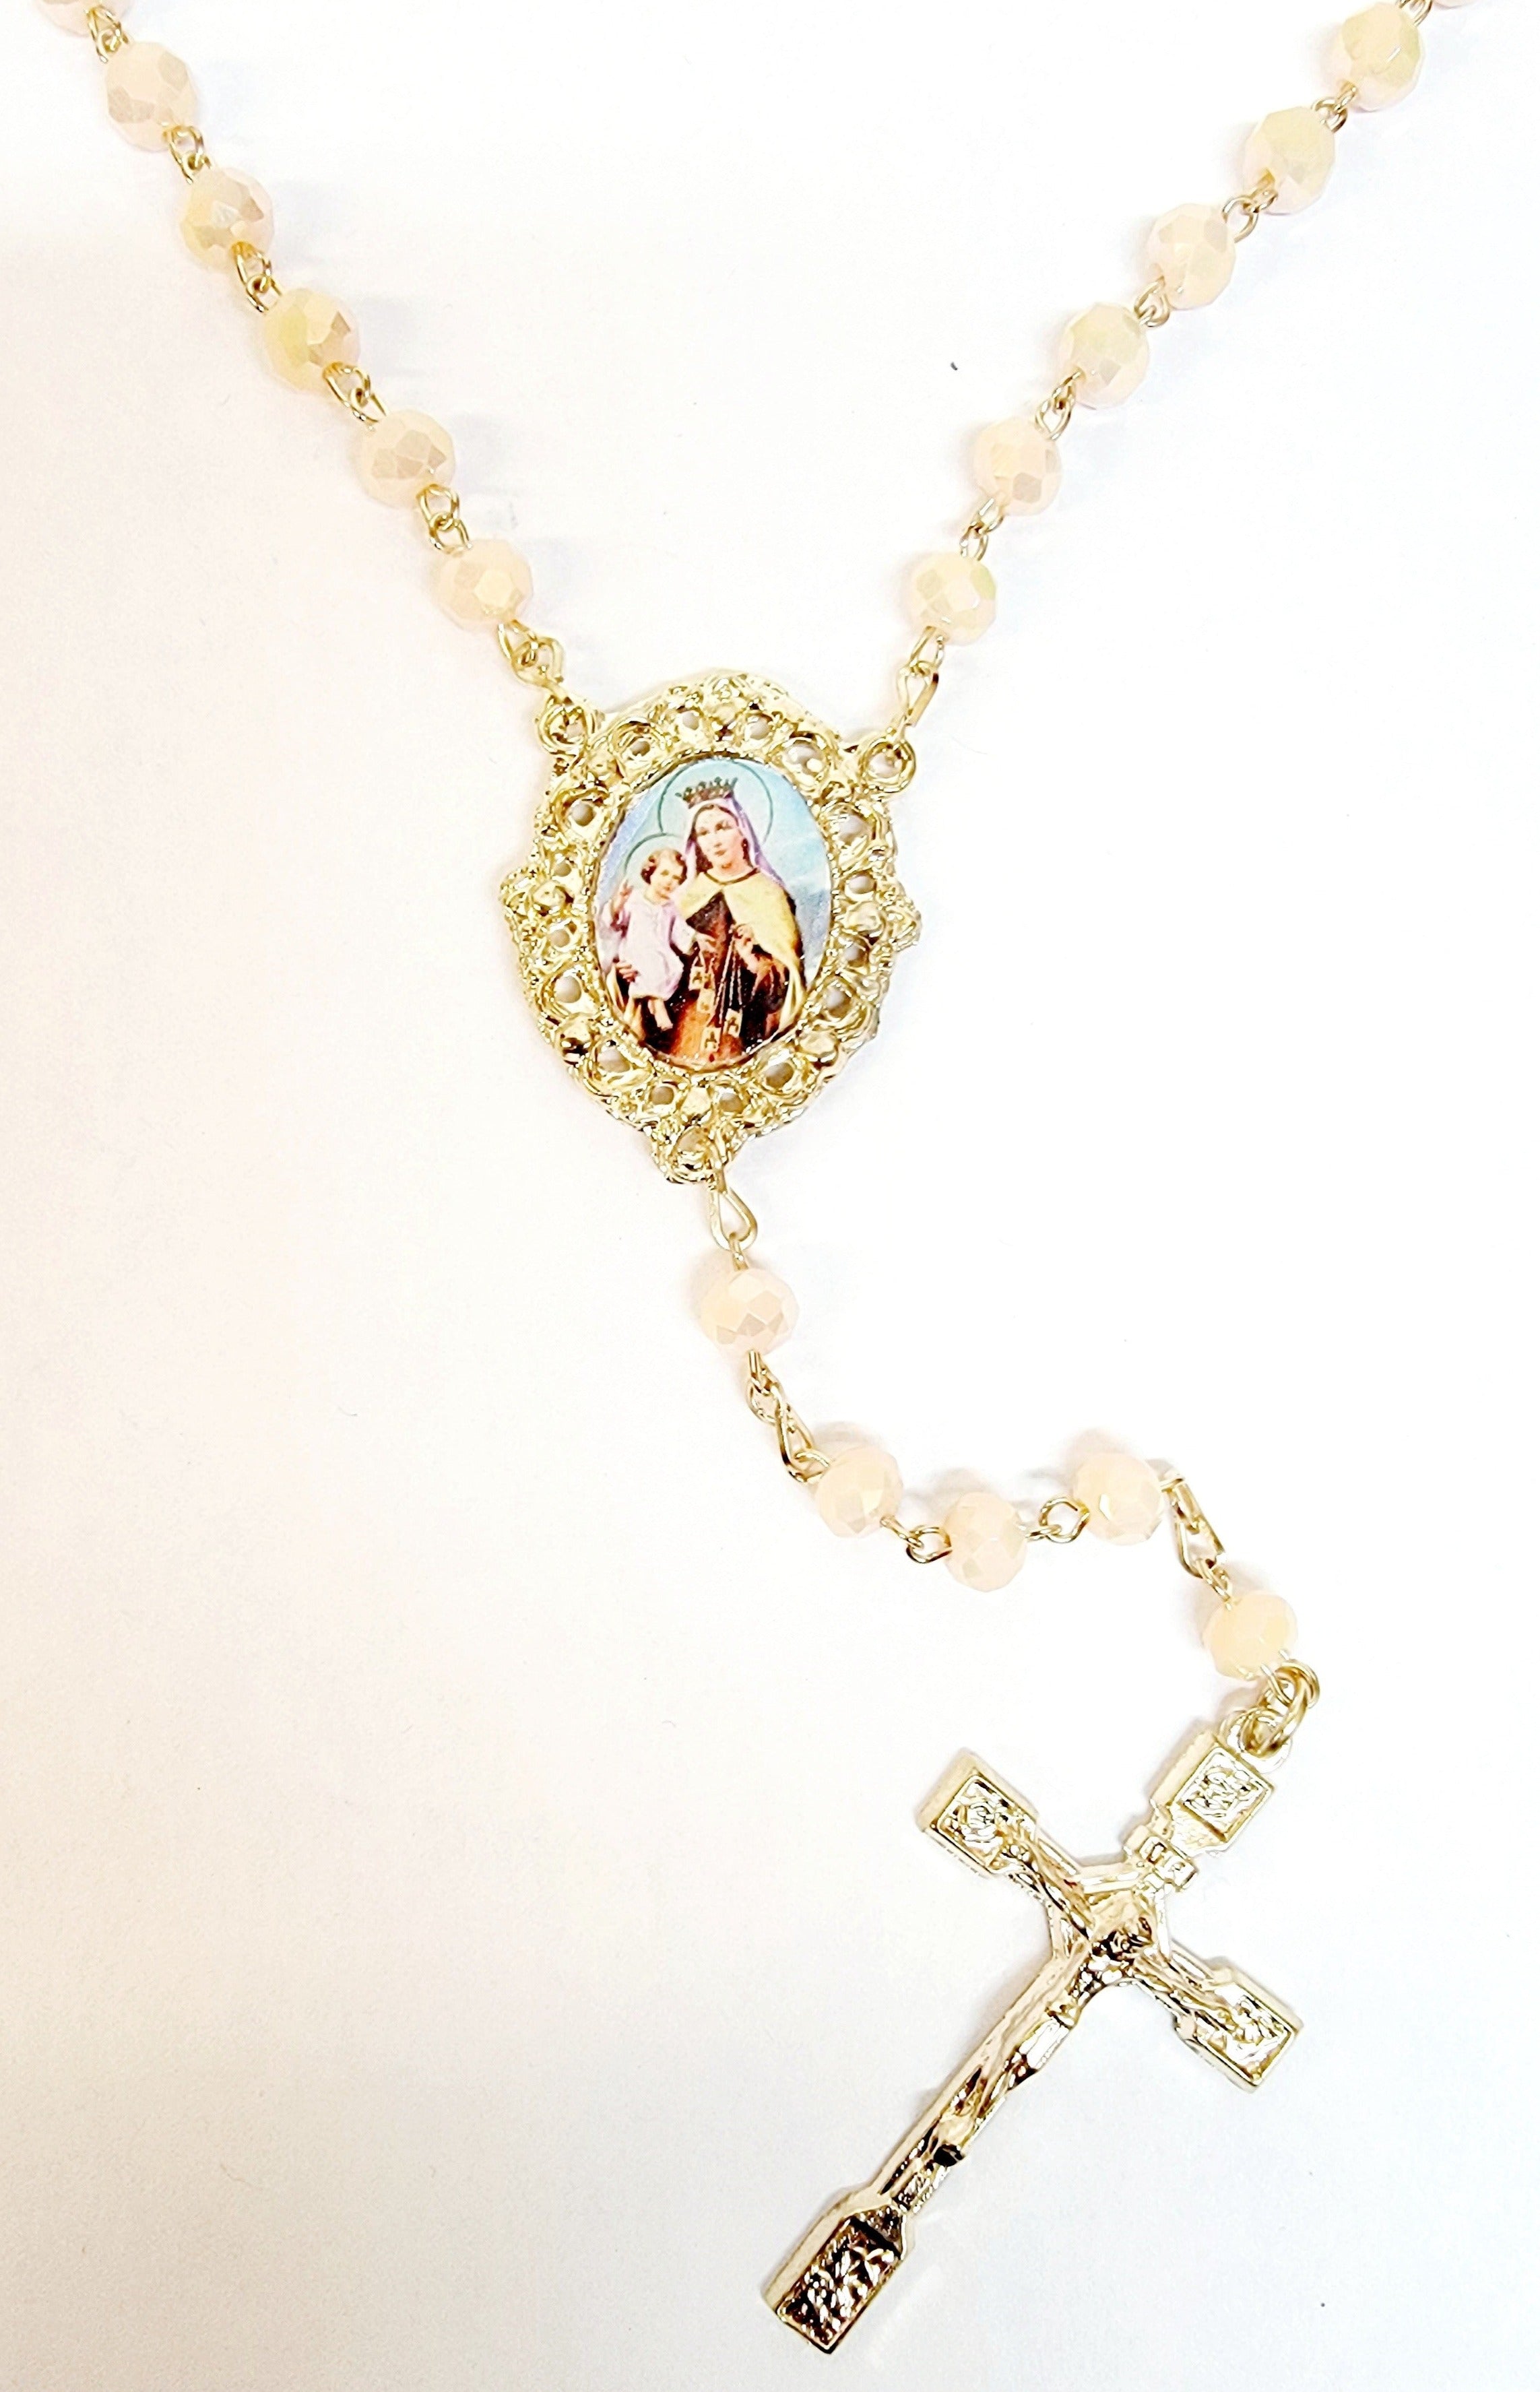 Our Lady of Mount Carmel Crystal Peach Rosary